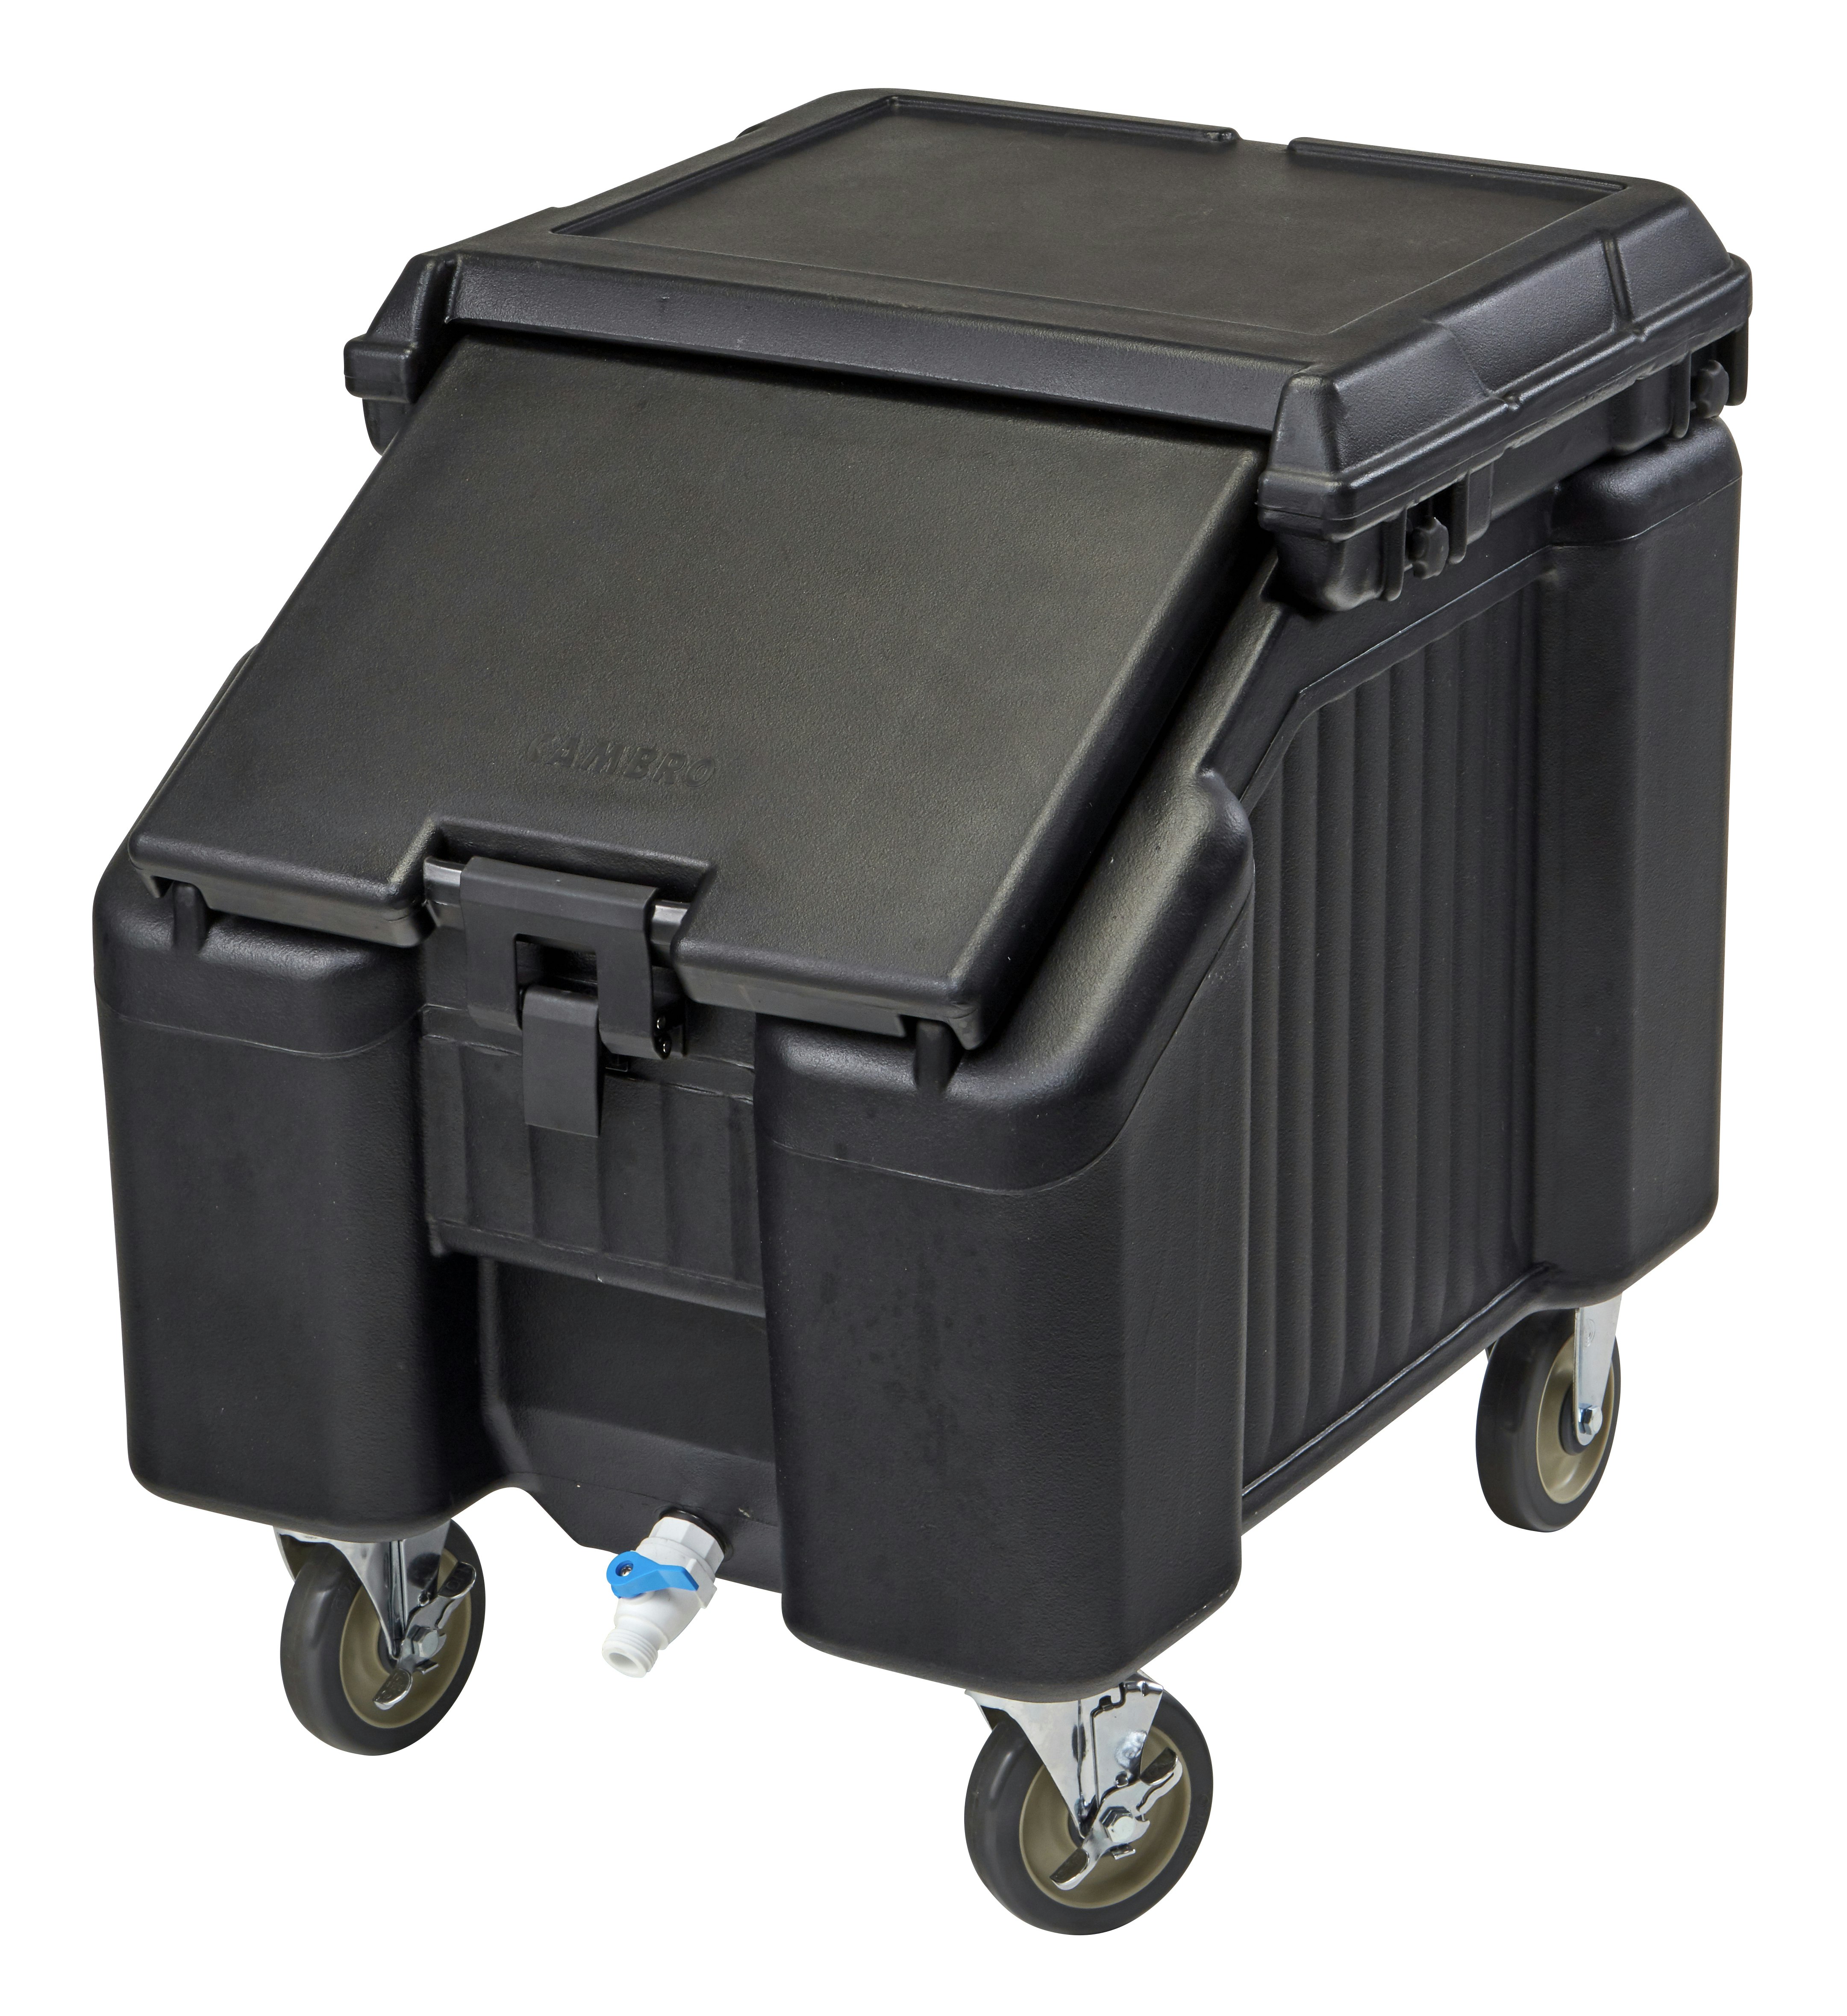 24 x 18 Stainless Steel Portable Ice Bin with Sliding Lid